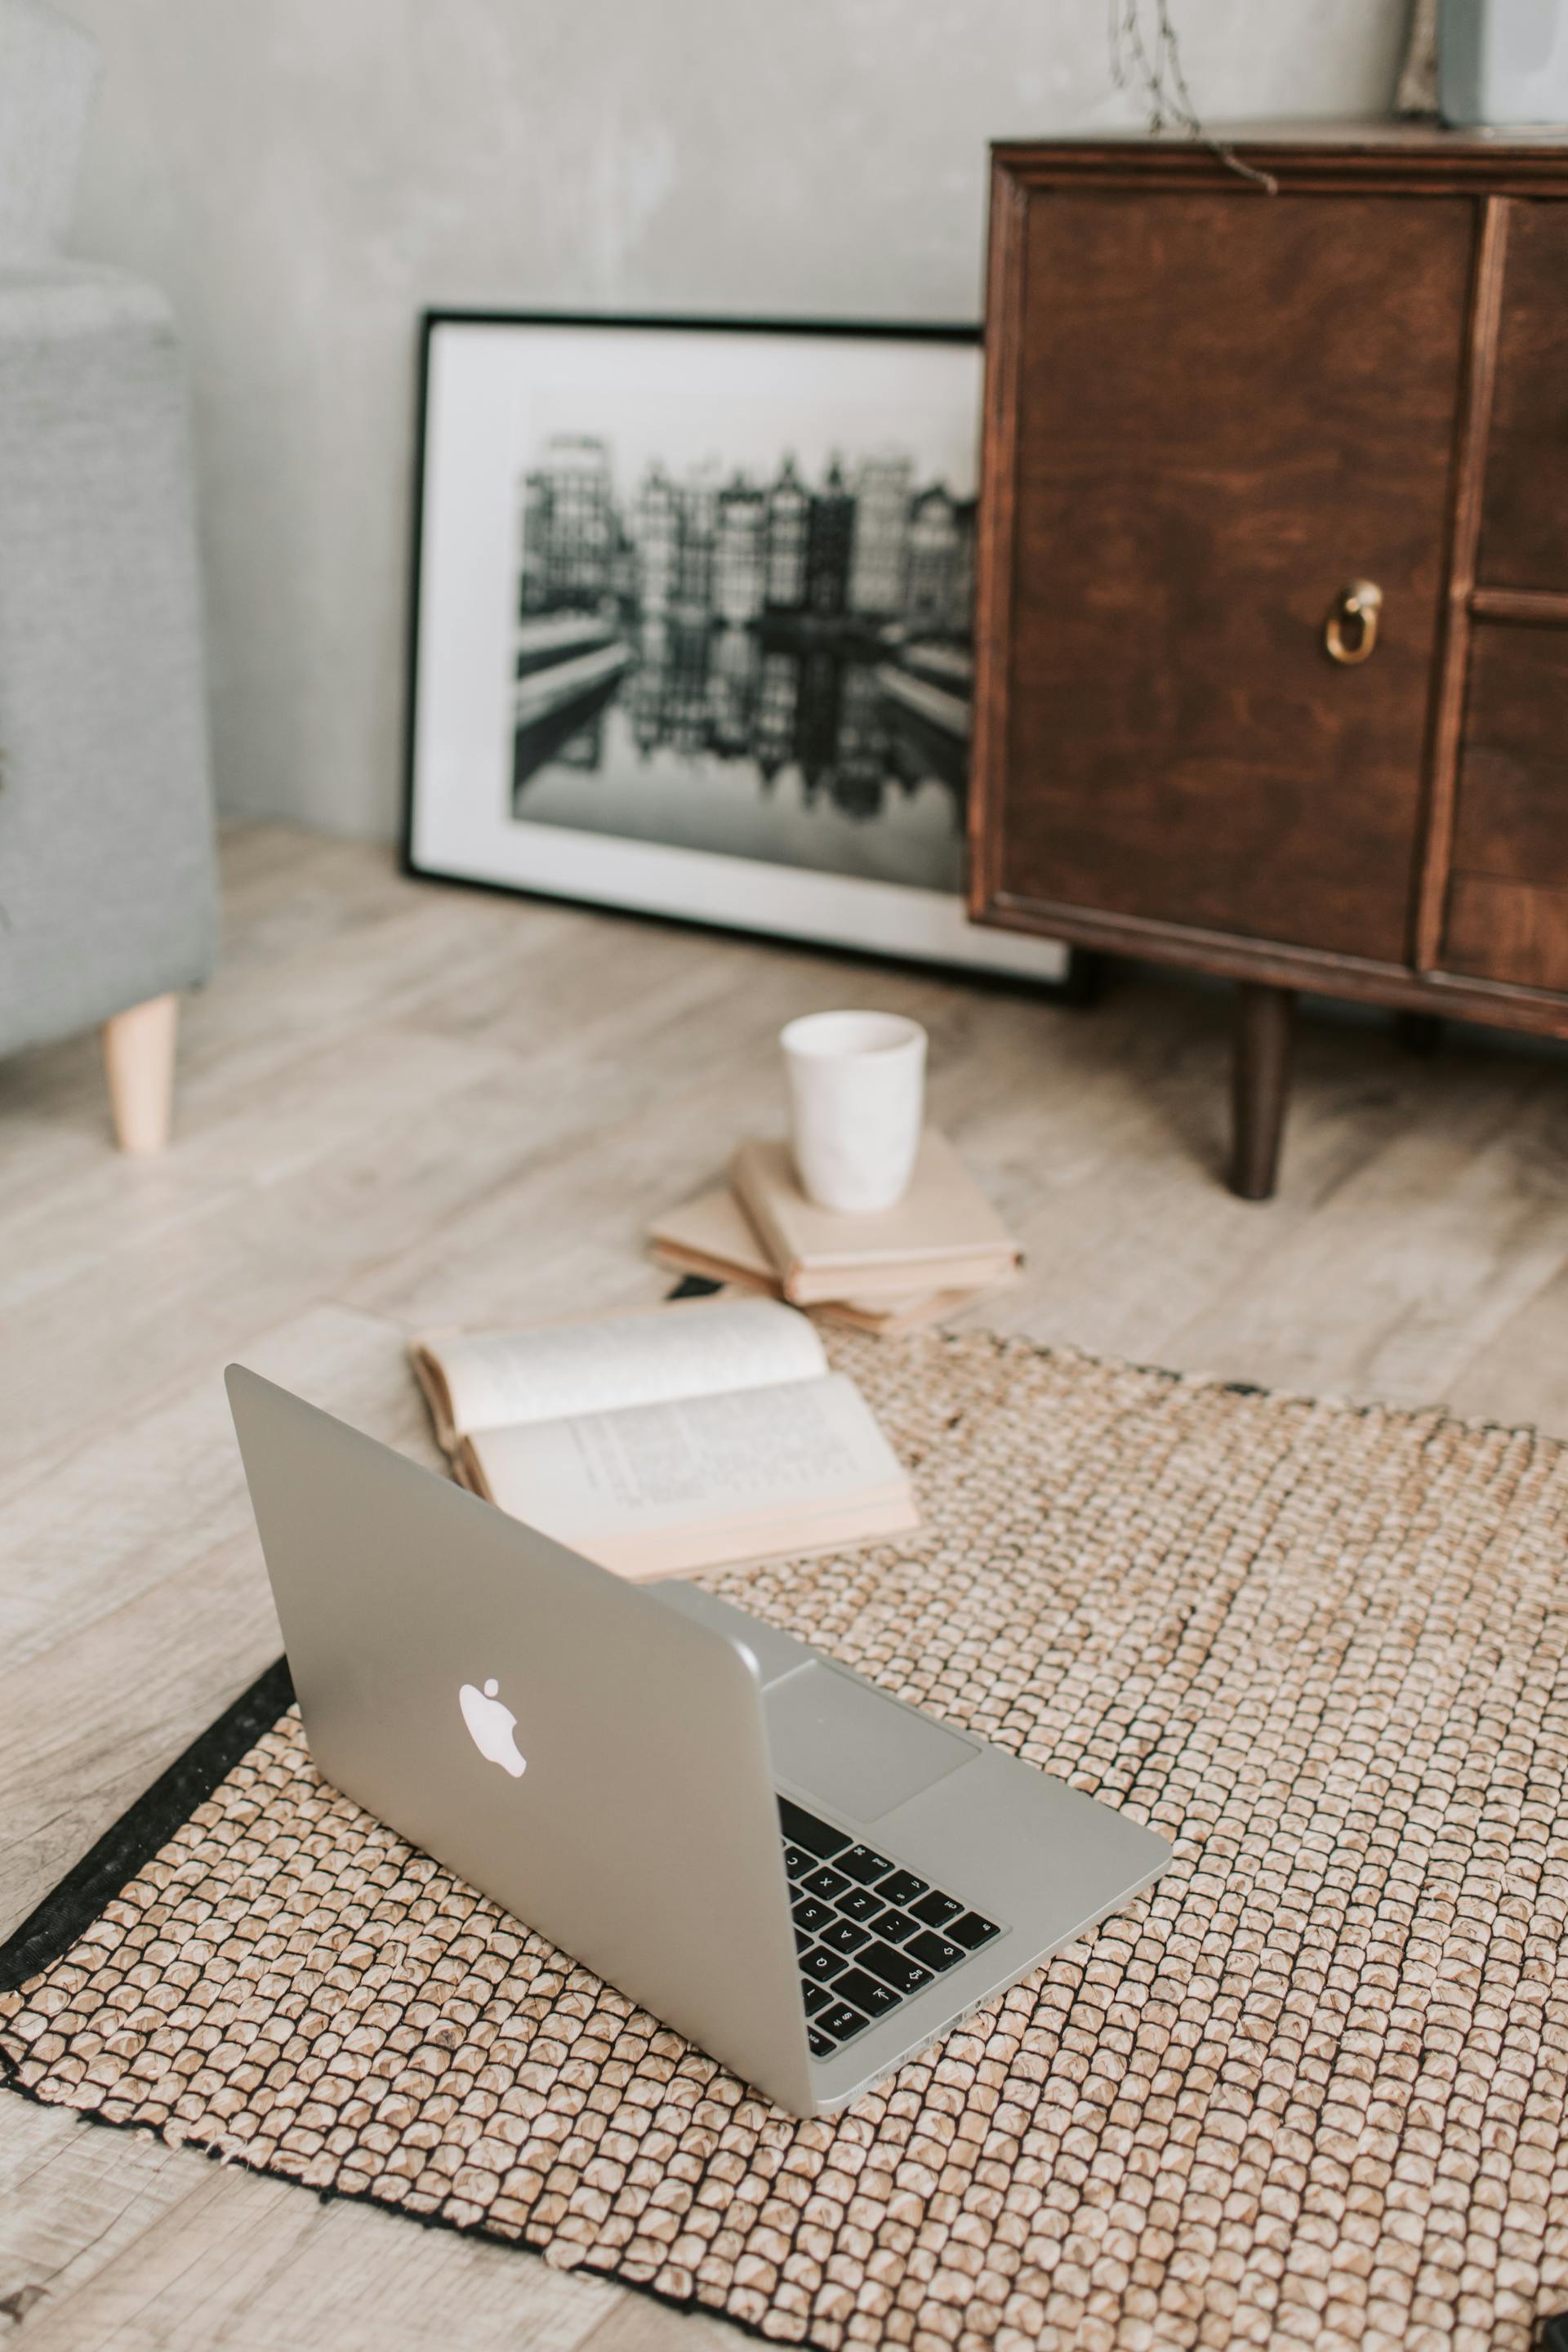 A laptop and books lying on a rug | Source: Pexels